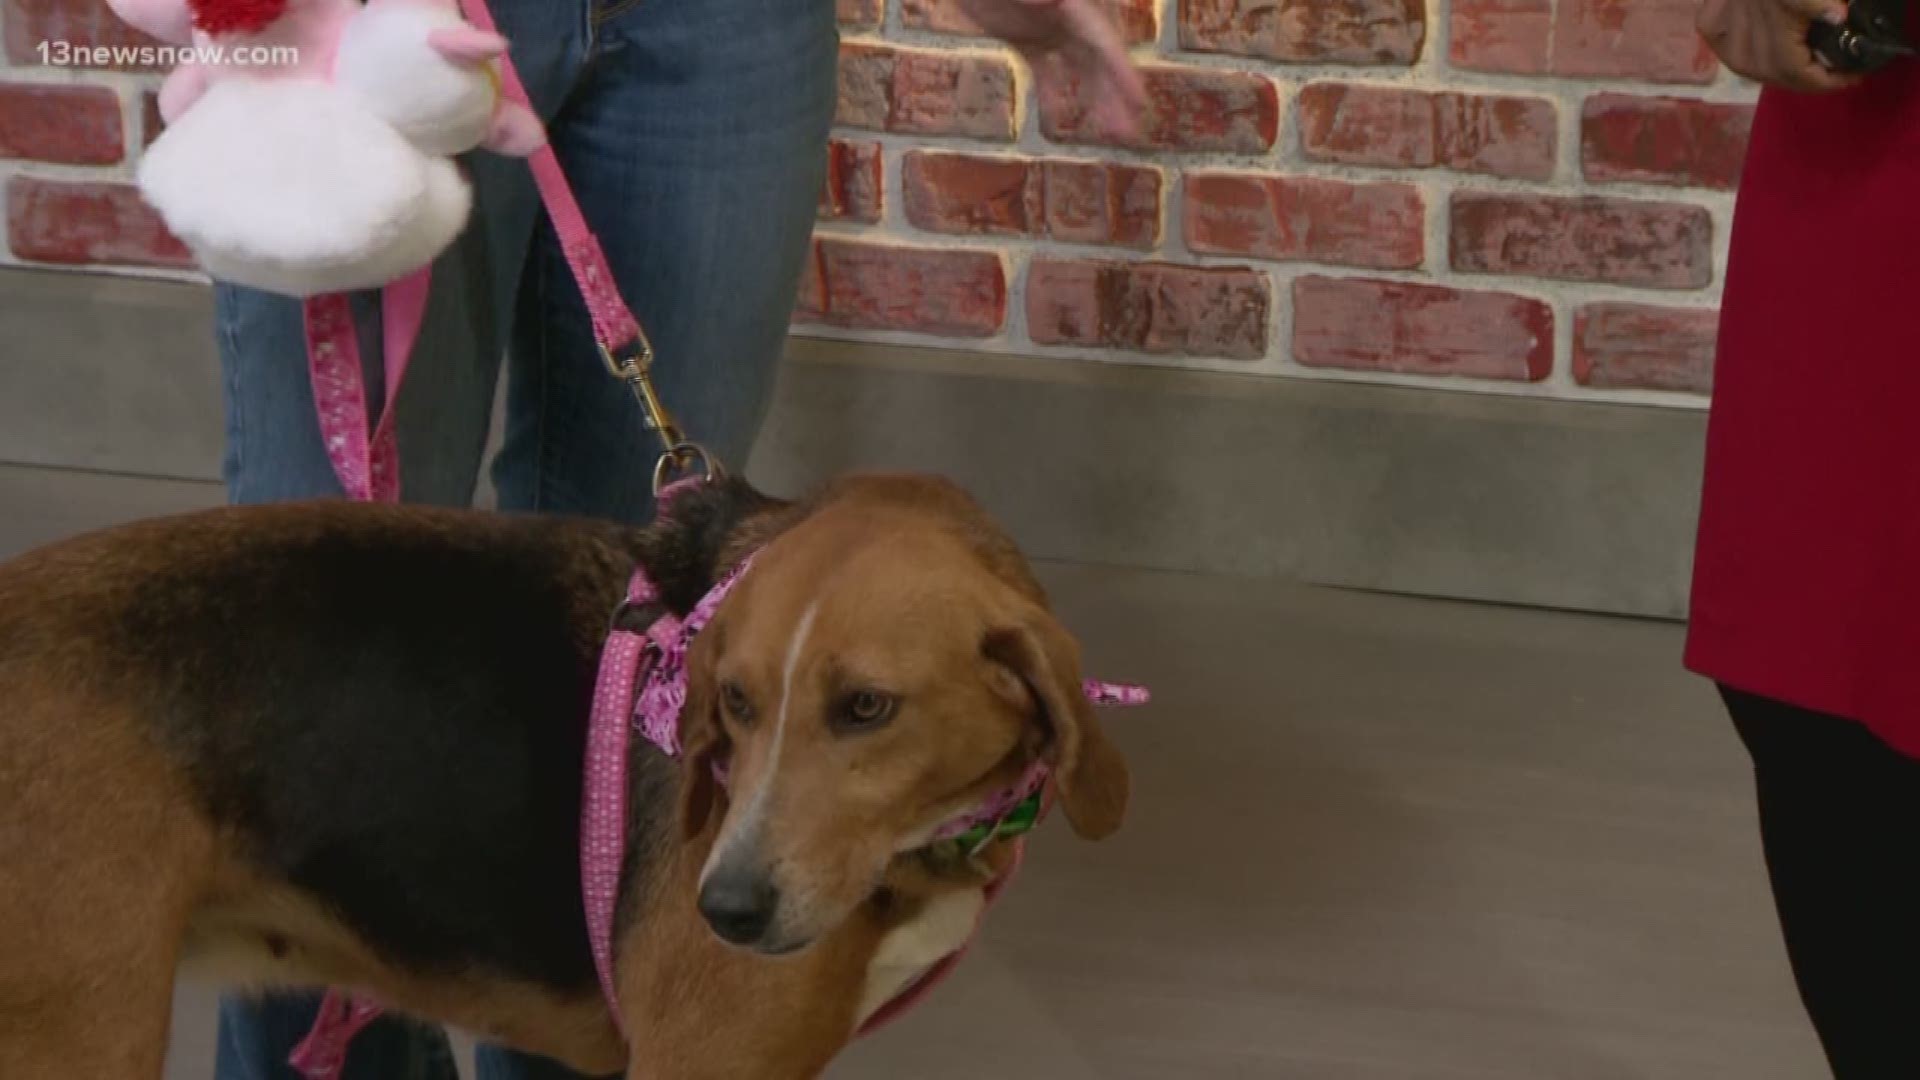 The Isle of Wight County Animal Shelter brought in Bailey who is looking for a family to adopt her.